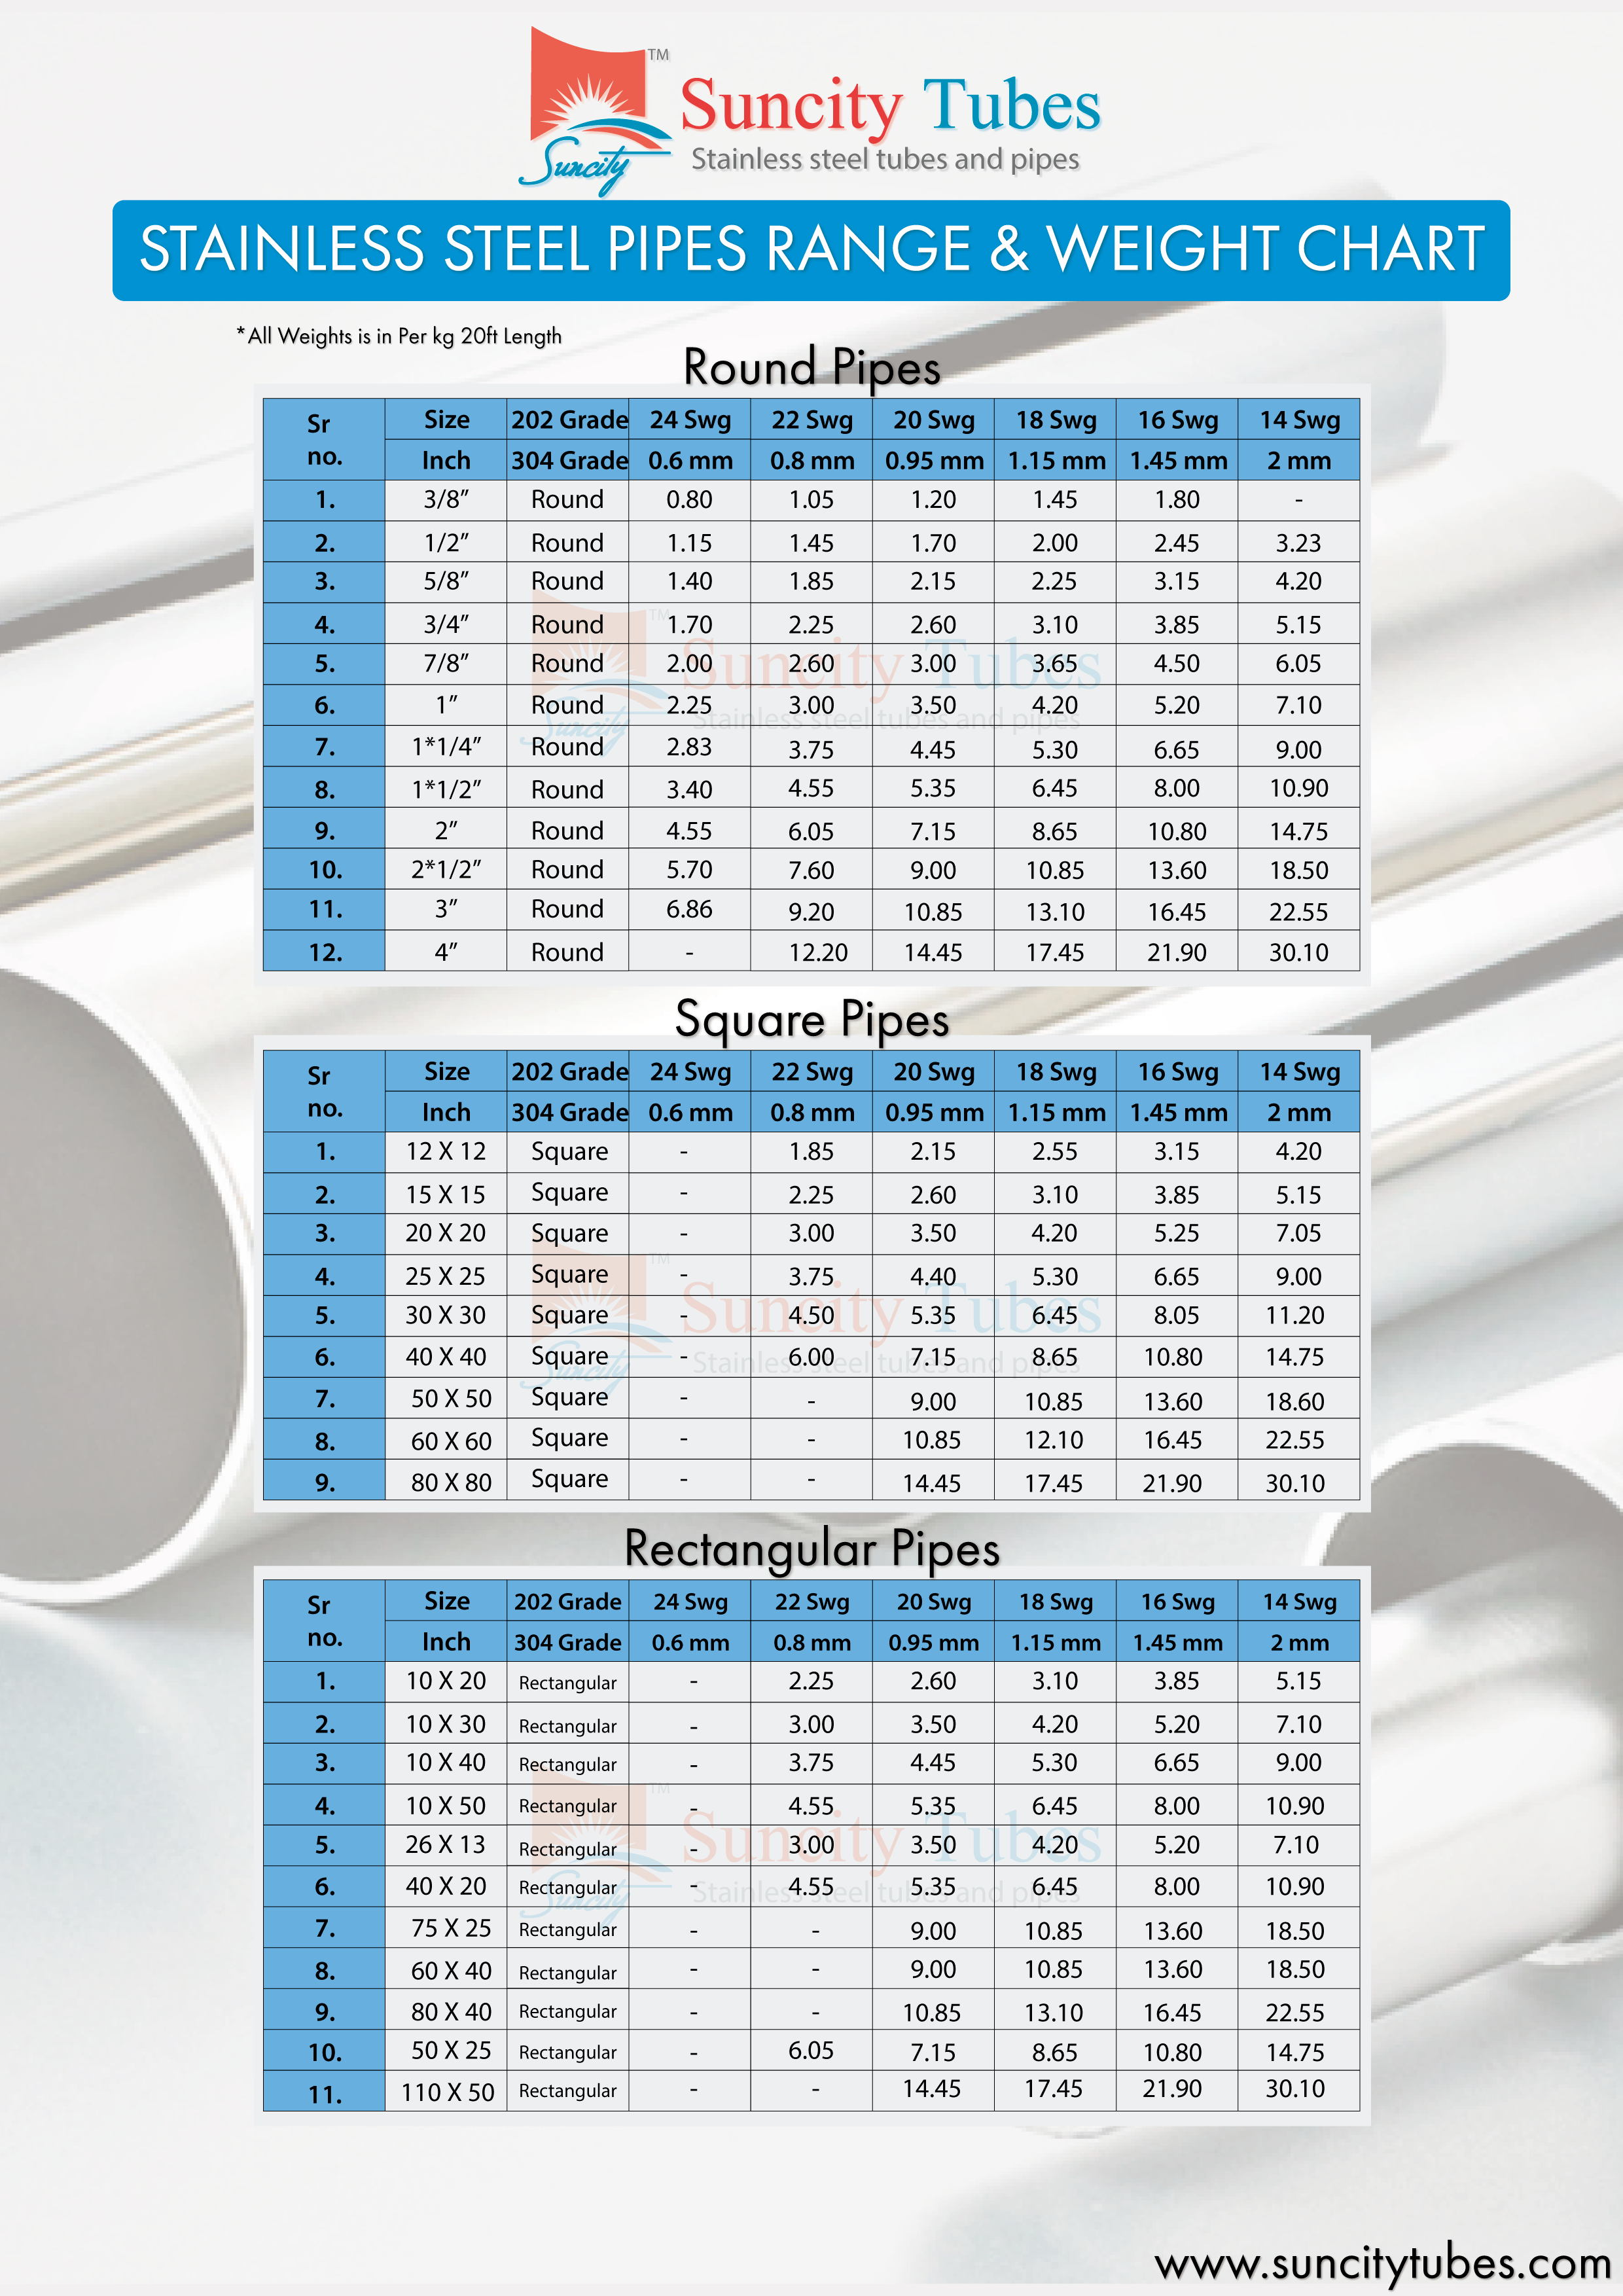 Stainless Steel Round Pipe Weight Chart